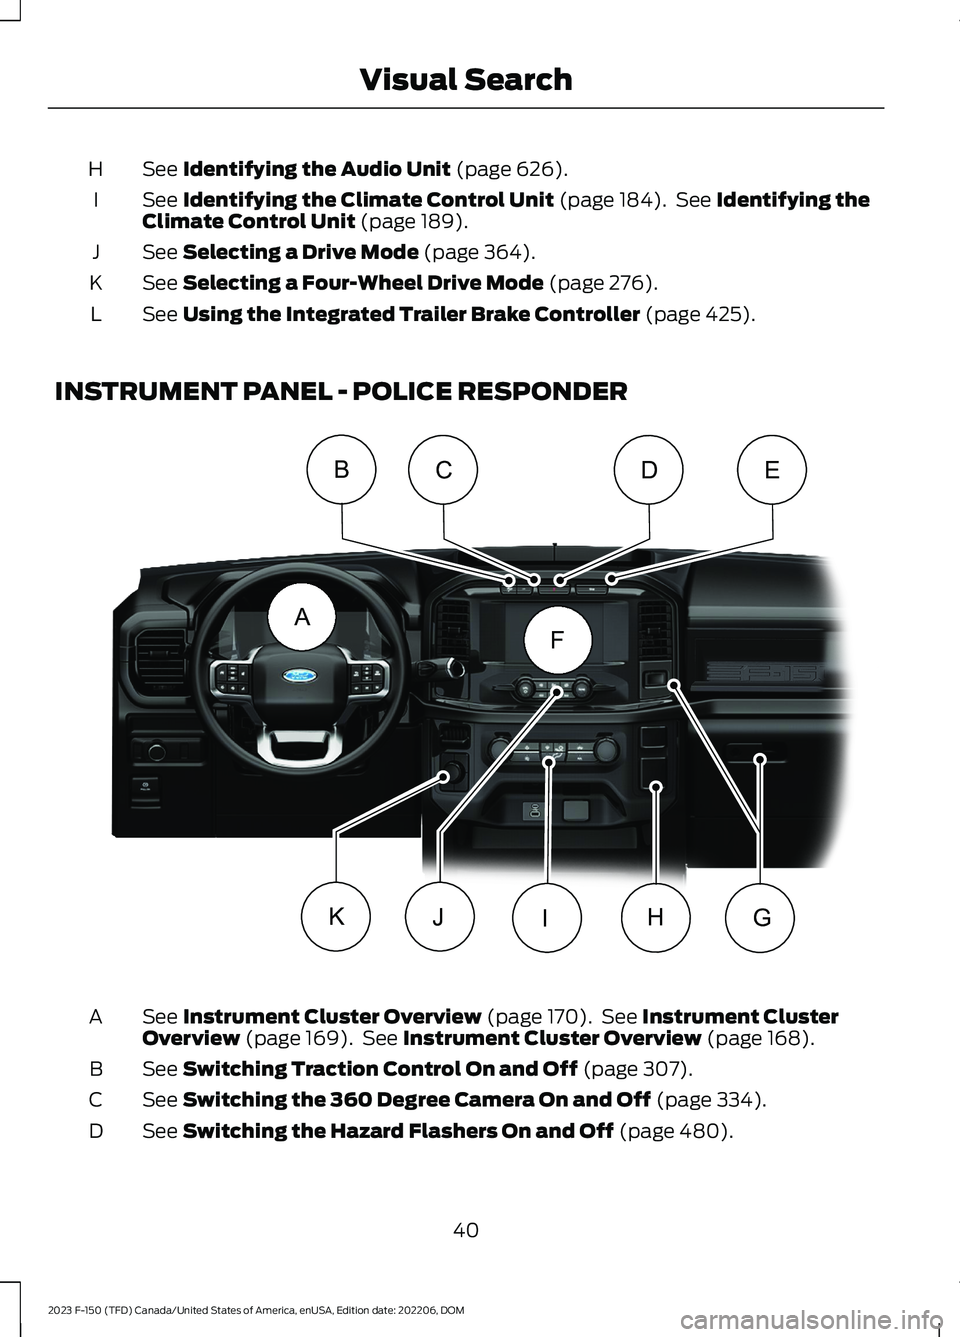 FORD F150 2023  Owners Manual See Identifying the Audio Unit (page 626).H
See Identifying the Climate Control Unit (page 184). See Identifying theClimate Control Unit (page 189).I
See Selecting a Drive Mode (page 364).J
See Select